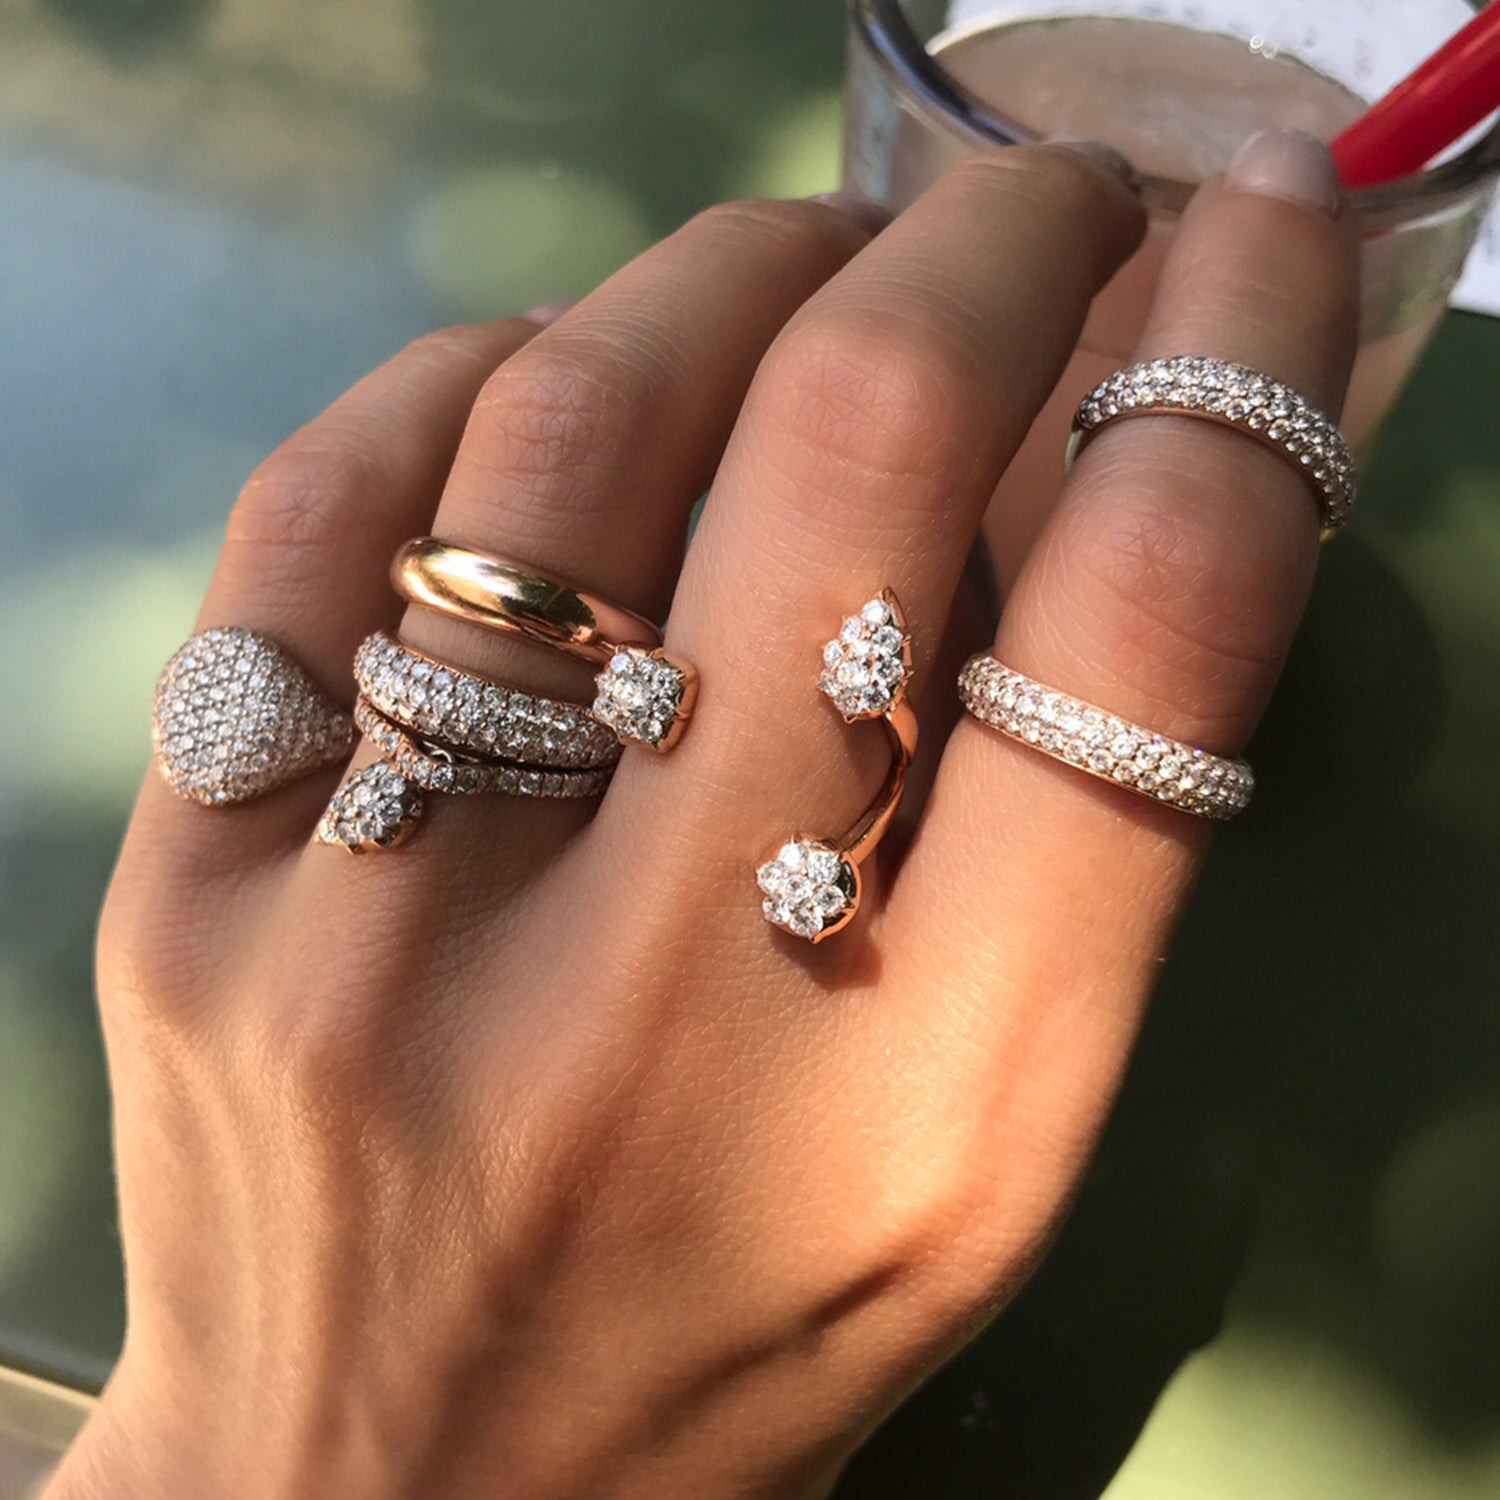 The Bling Ring is shown stacked with our Gemini Ring, Swing Ring, Throne Ring, and Olympus Ring.